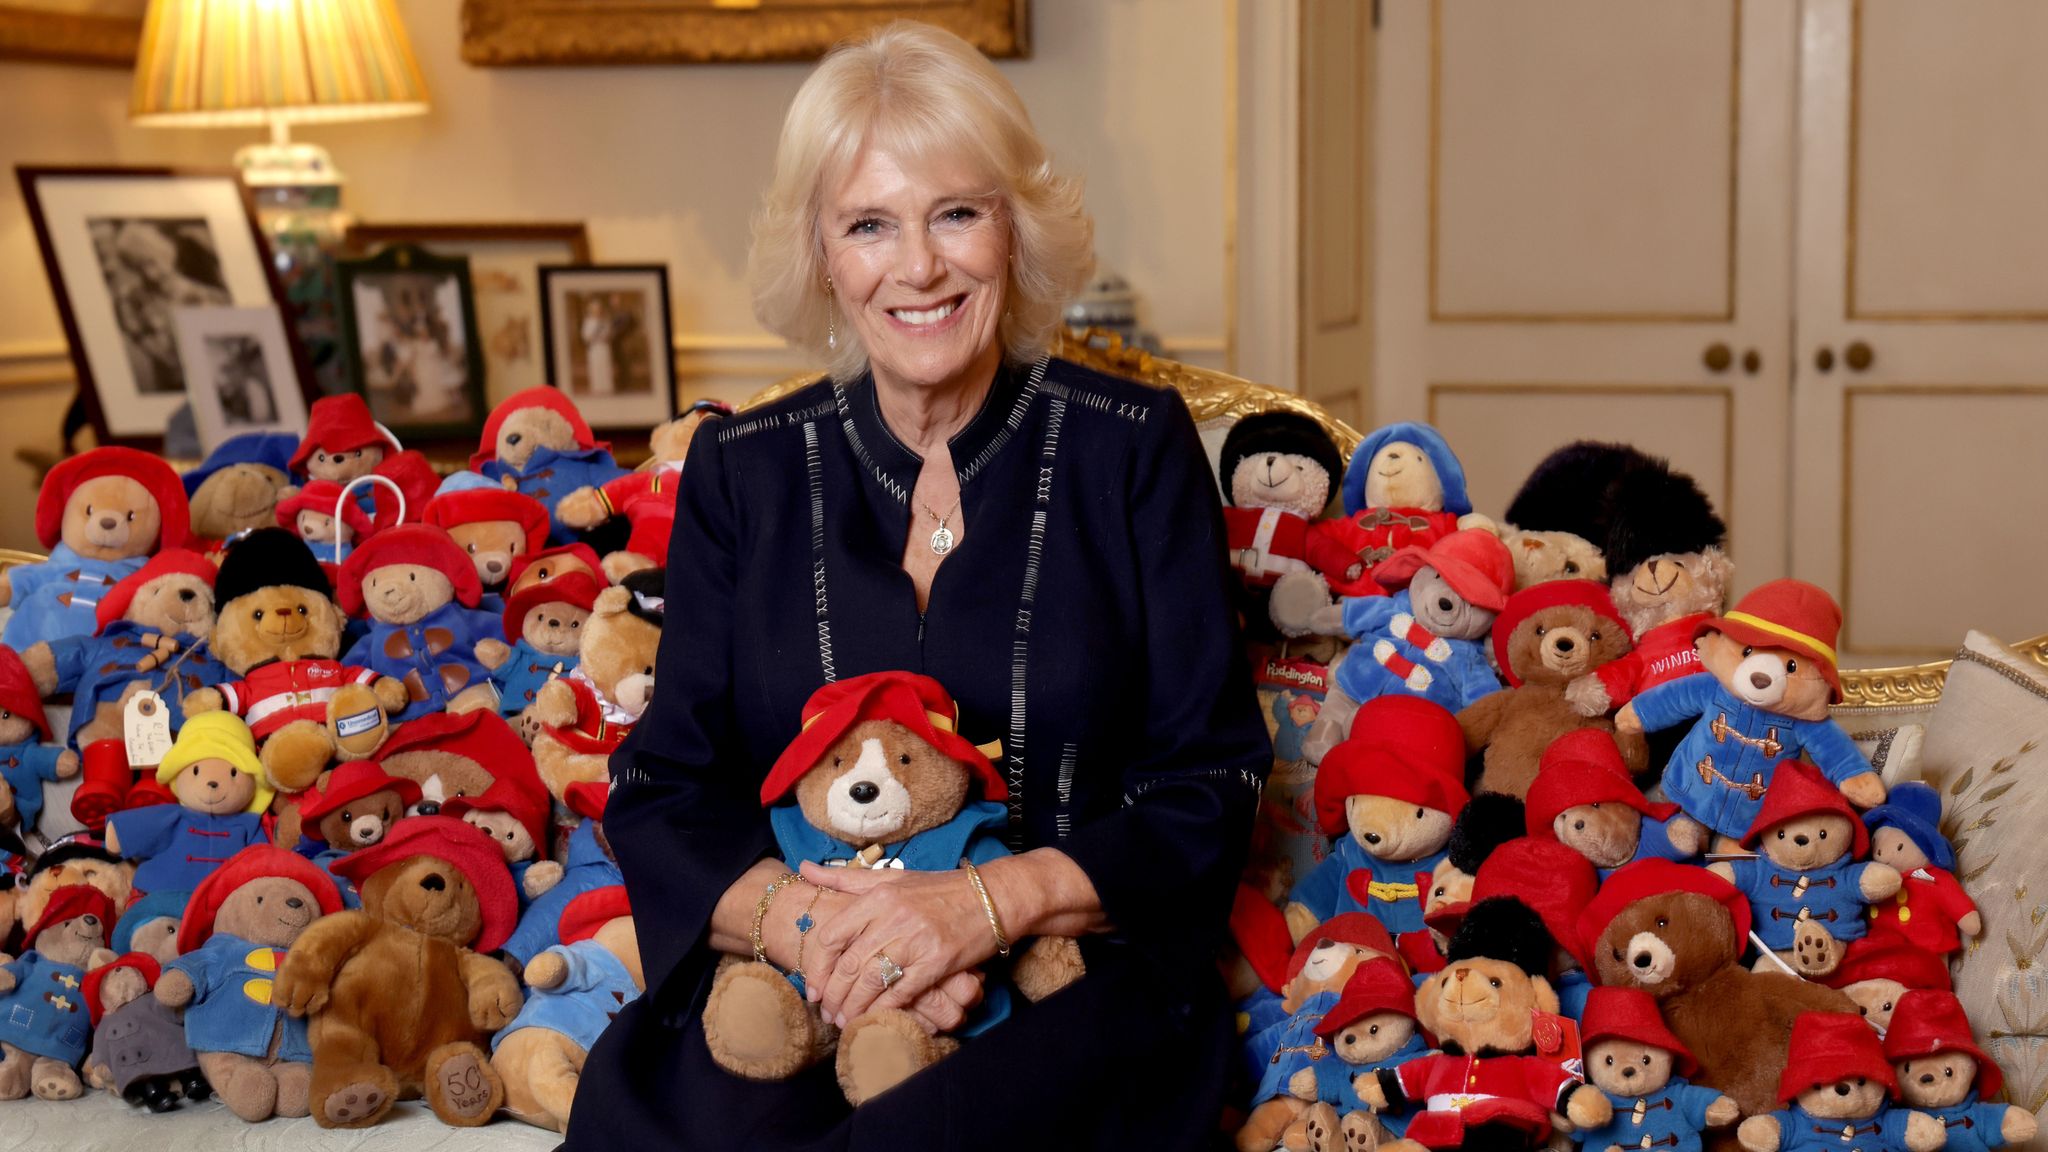 Camilla pictured surrounded by Paddington Bears as tributes to